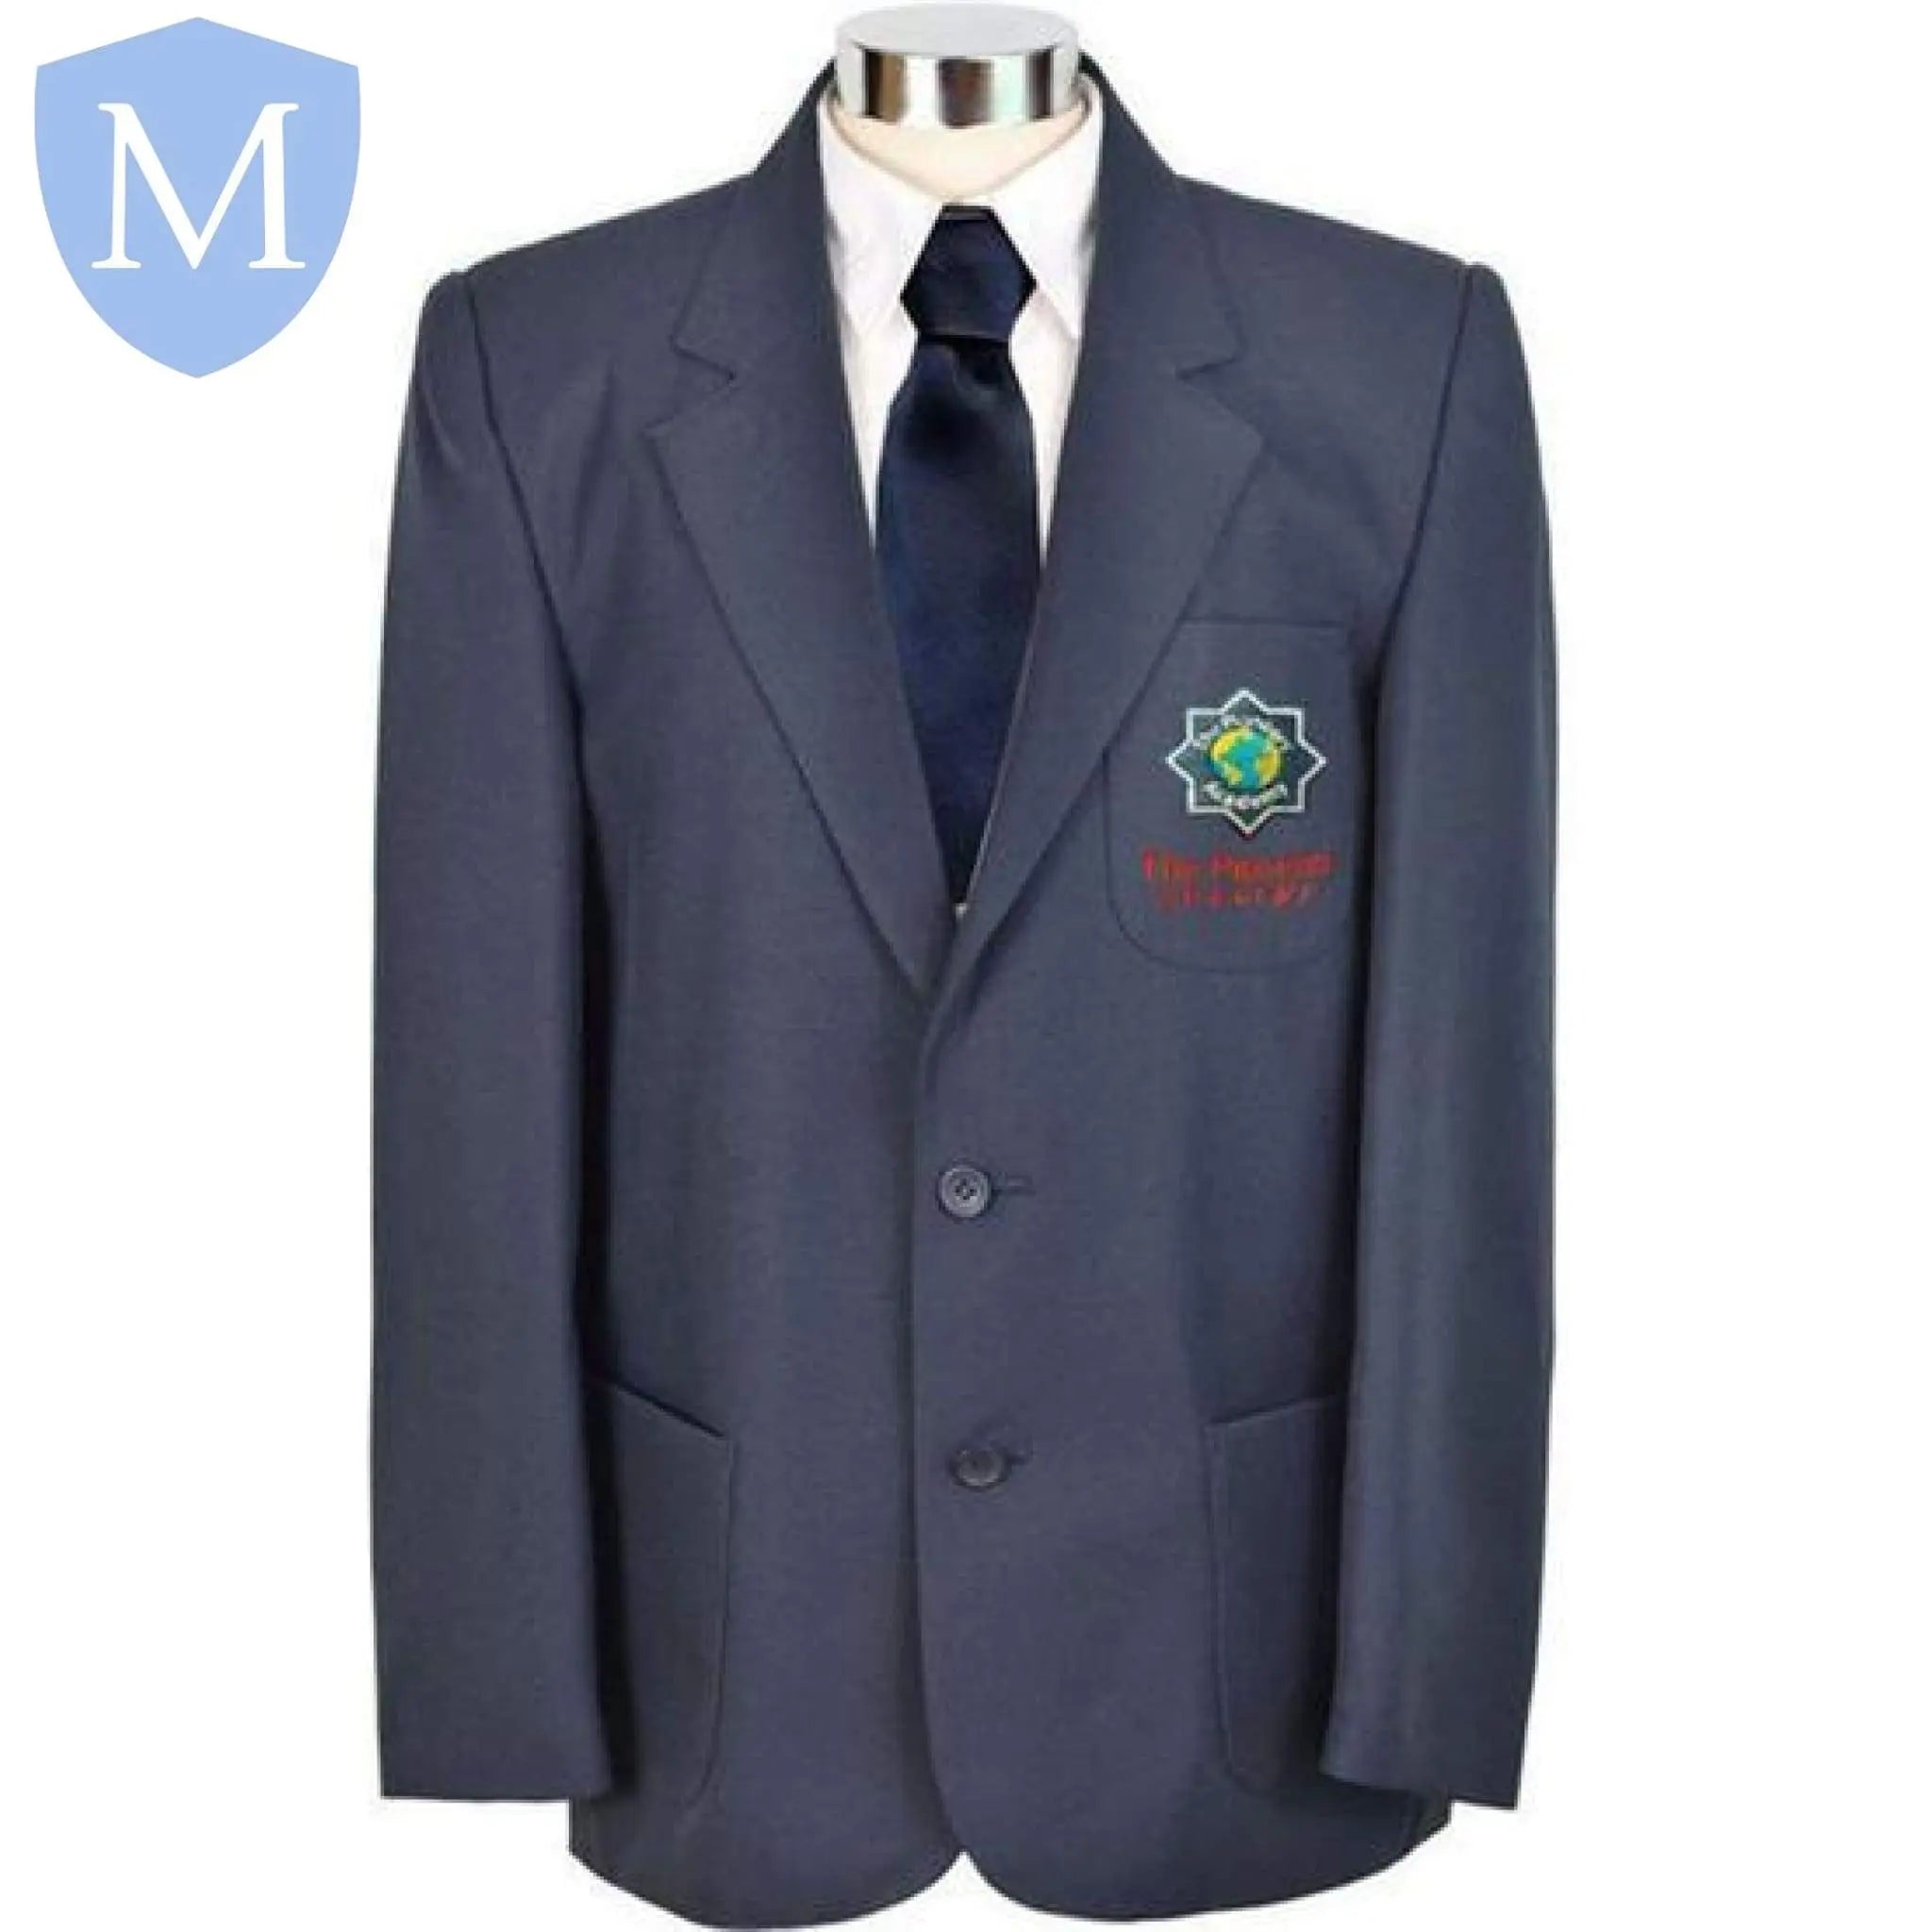 The Pioneers Academy Boys Blazers Chest 26 (7/8 Years),Chest 27 (7/8 Years),Chest 28 (9/10 Years),Chest 29 (9/10 Years),Chest 30 (9/10 Years),Chest 31 (11/12 Years),Chest 32 (11/12 Years),Chest 33 (11/12 Years),Chest 34 (13 Years),Chest 35 (13 Years),Chest 36 (13 Years),Chest 37 (14 Years),Chest 38 (14/16 Years),Chest 39 (14/16 Years),Chest 40,Chest 41,Chest 42,Chest 44,Chest 46,Chest 48,Chest 50,Chest 52